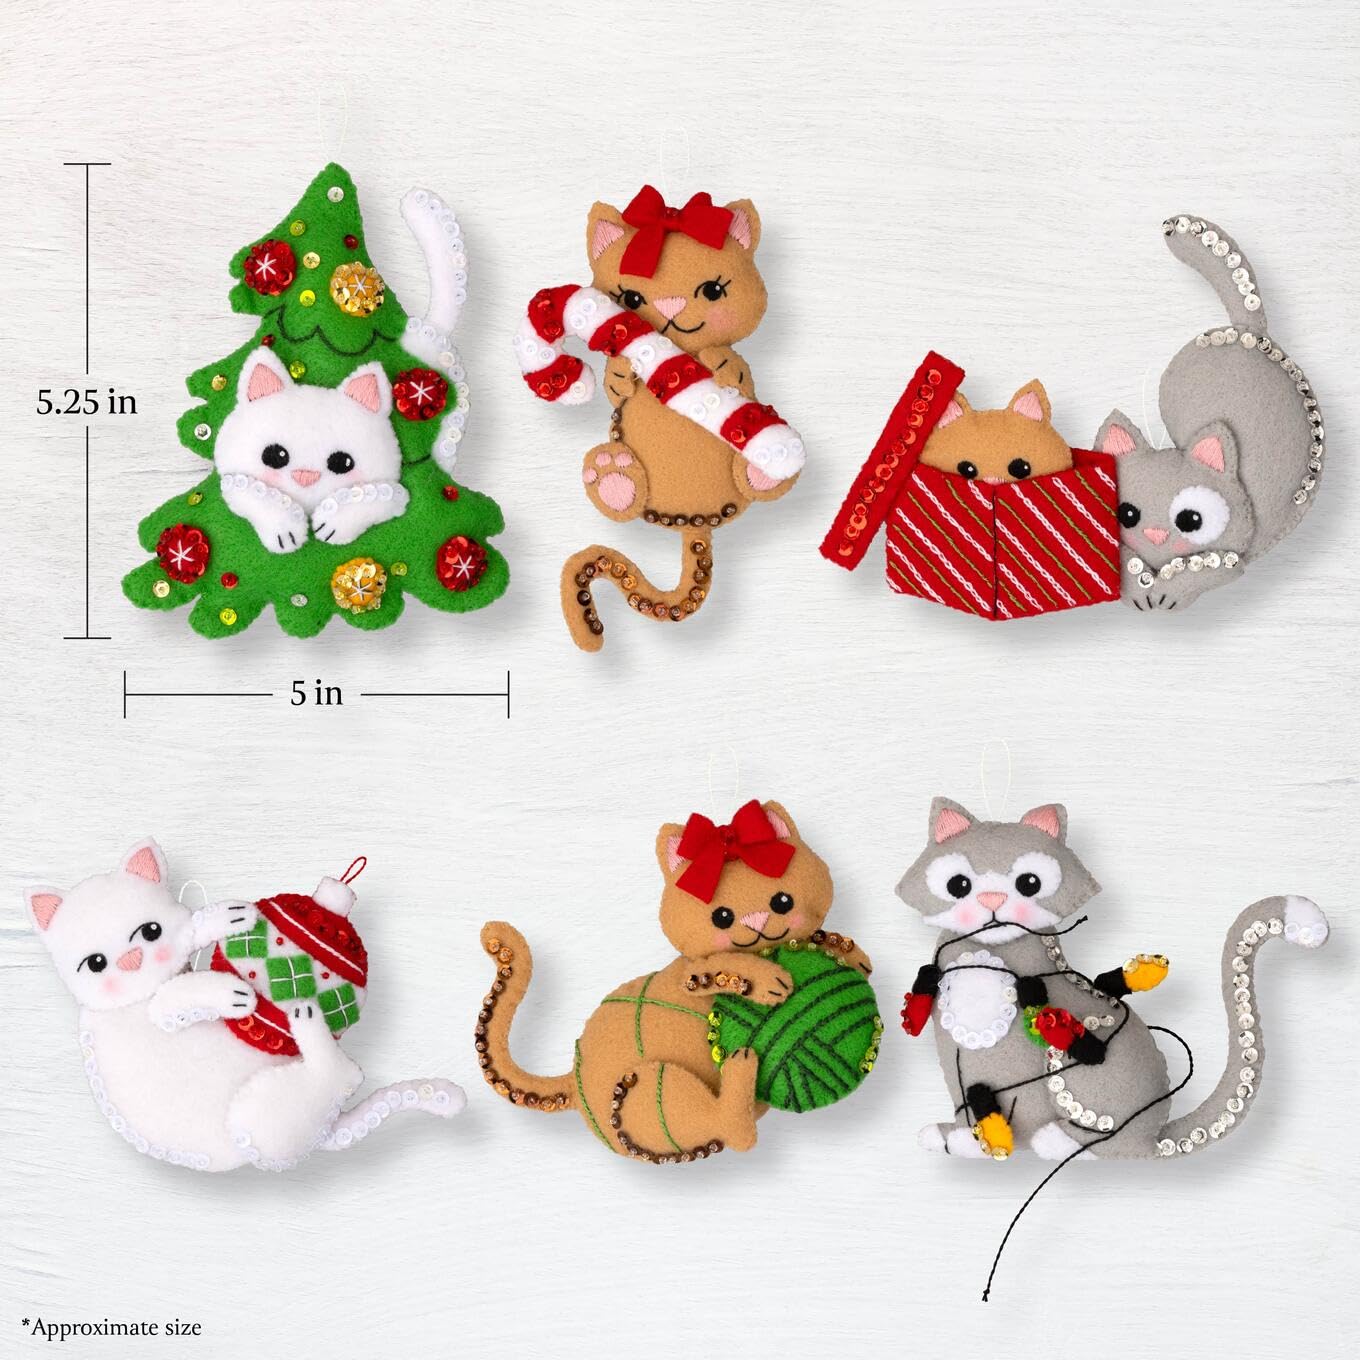 Bucilla, Frisky Kitties, Felt Applique 6 Piece Ornament Making Kit, Perfect for Holiday DIY Arts and Crafts, 89643E